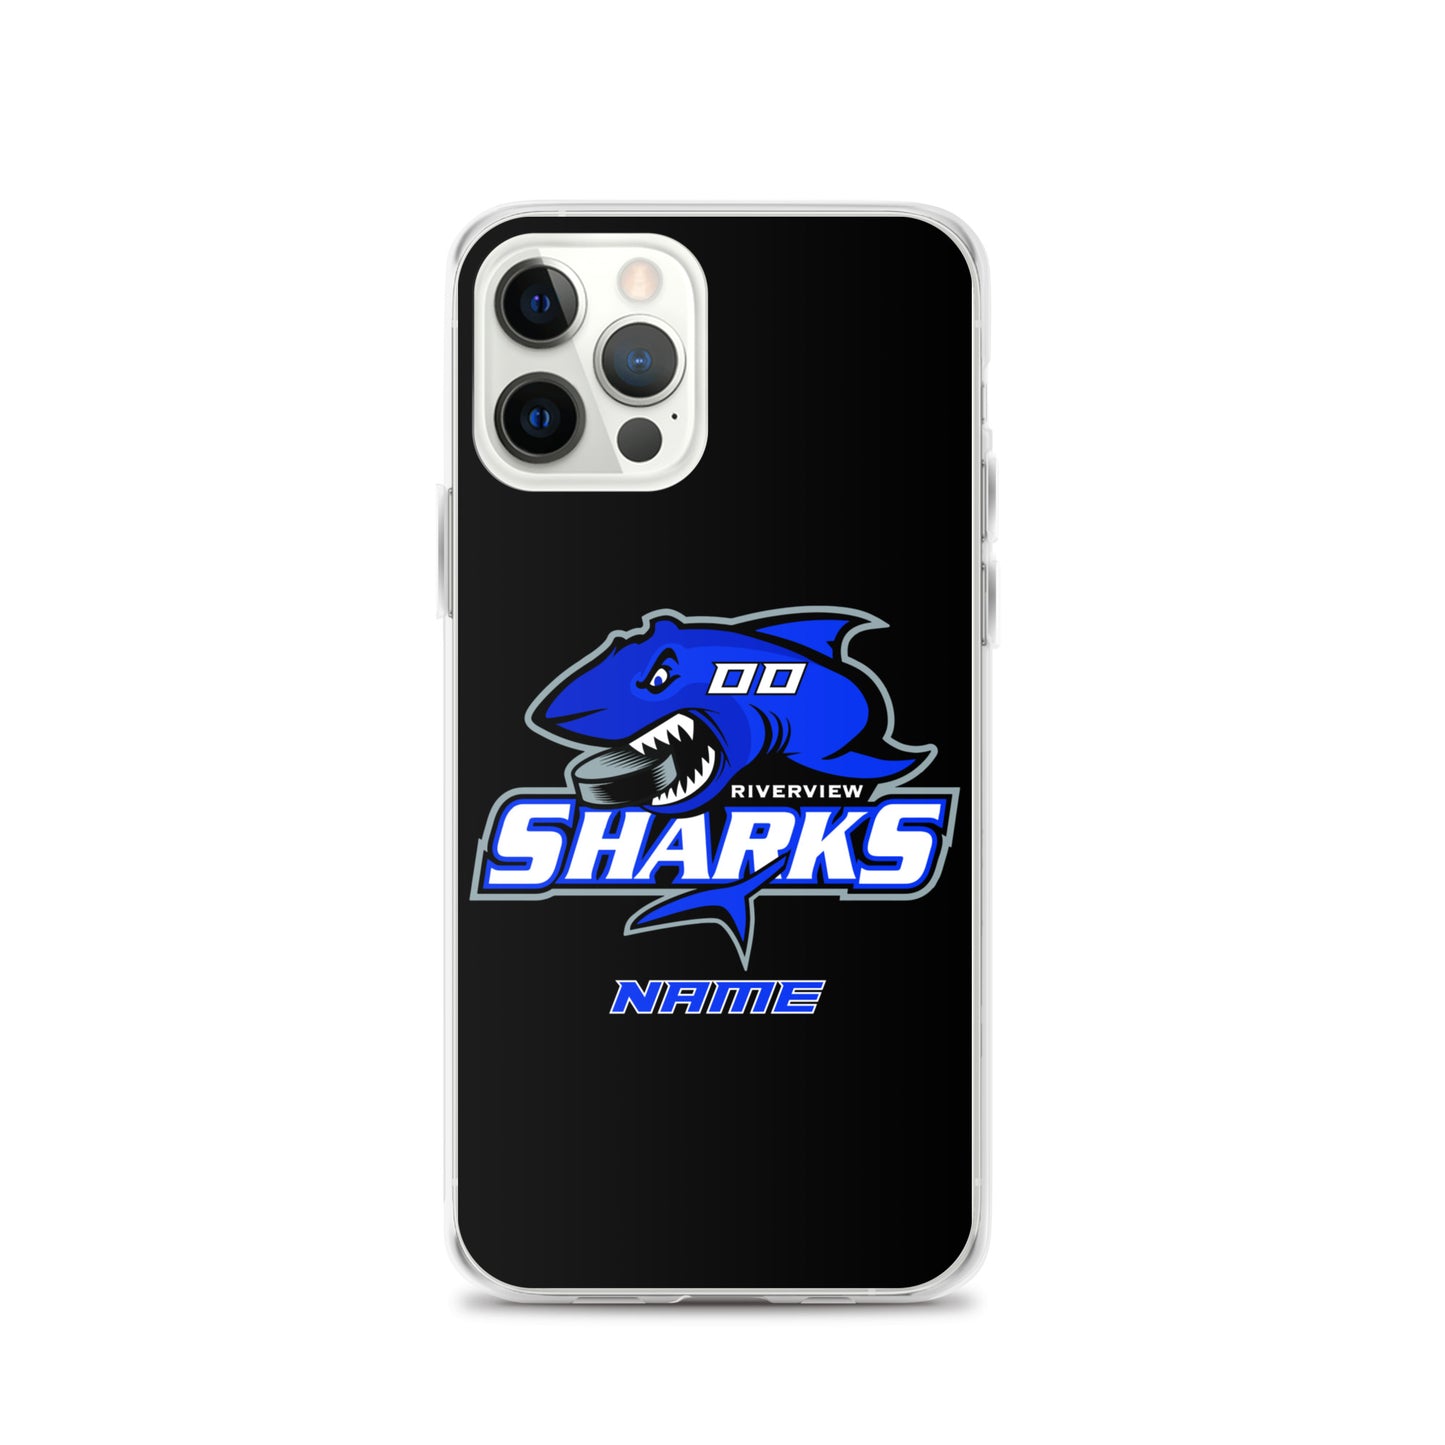 Riverview Sharks Hockey iPhone Case (Customizable)